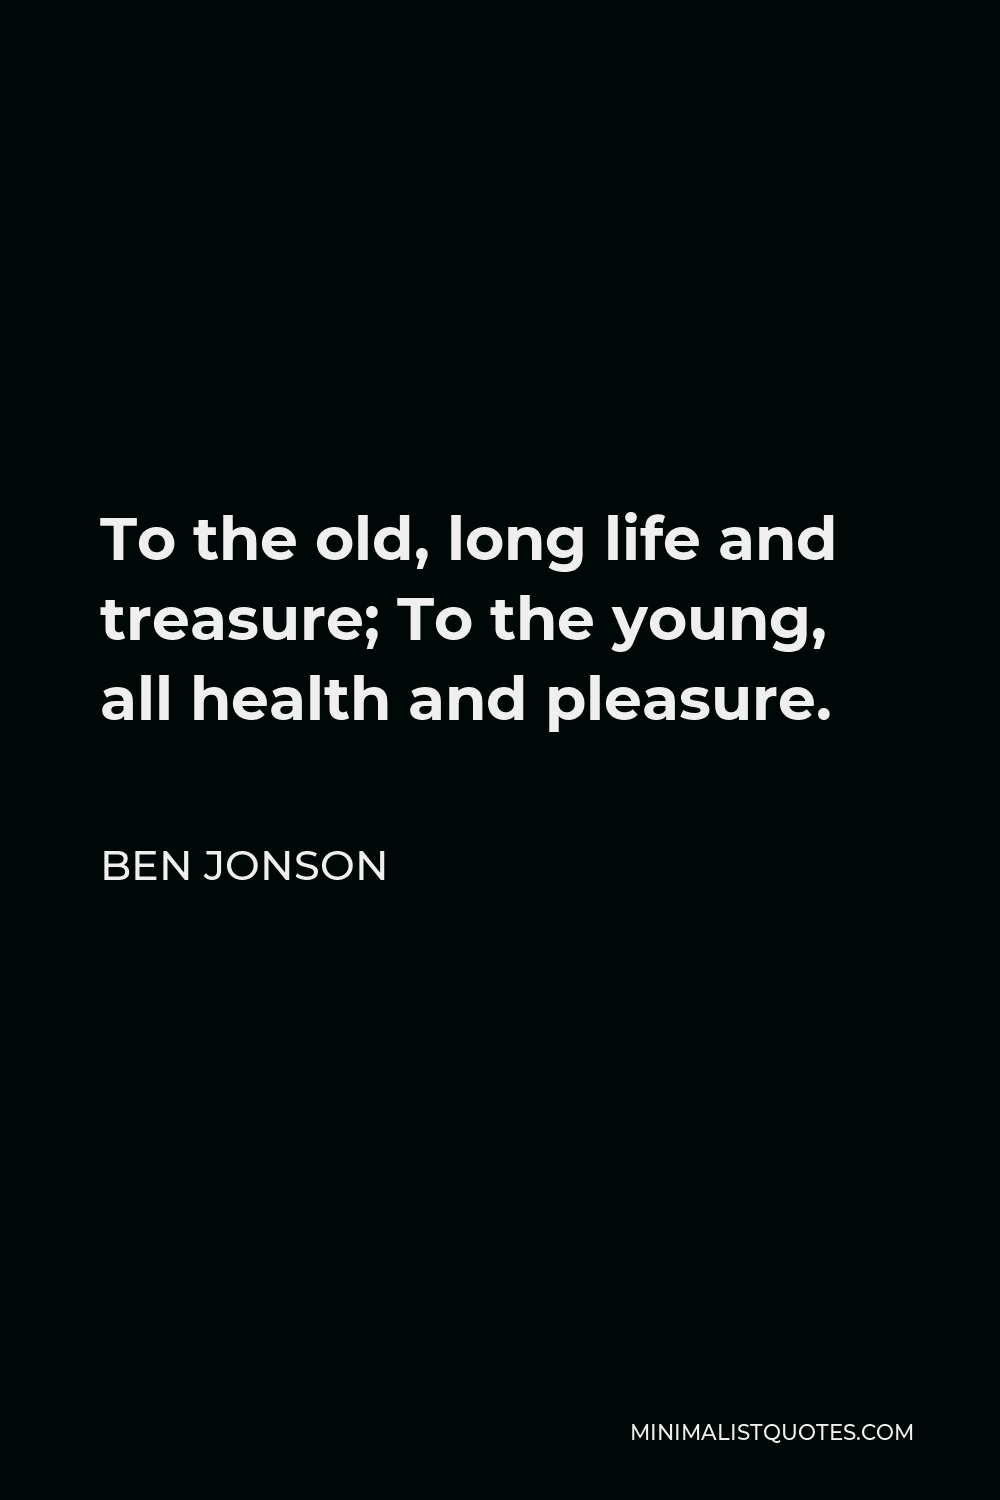 Ben Jonson Quote - To the old, long life and treasure; To the young, all health and pleasure.